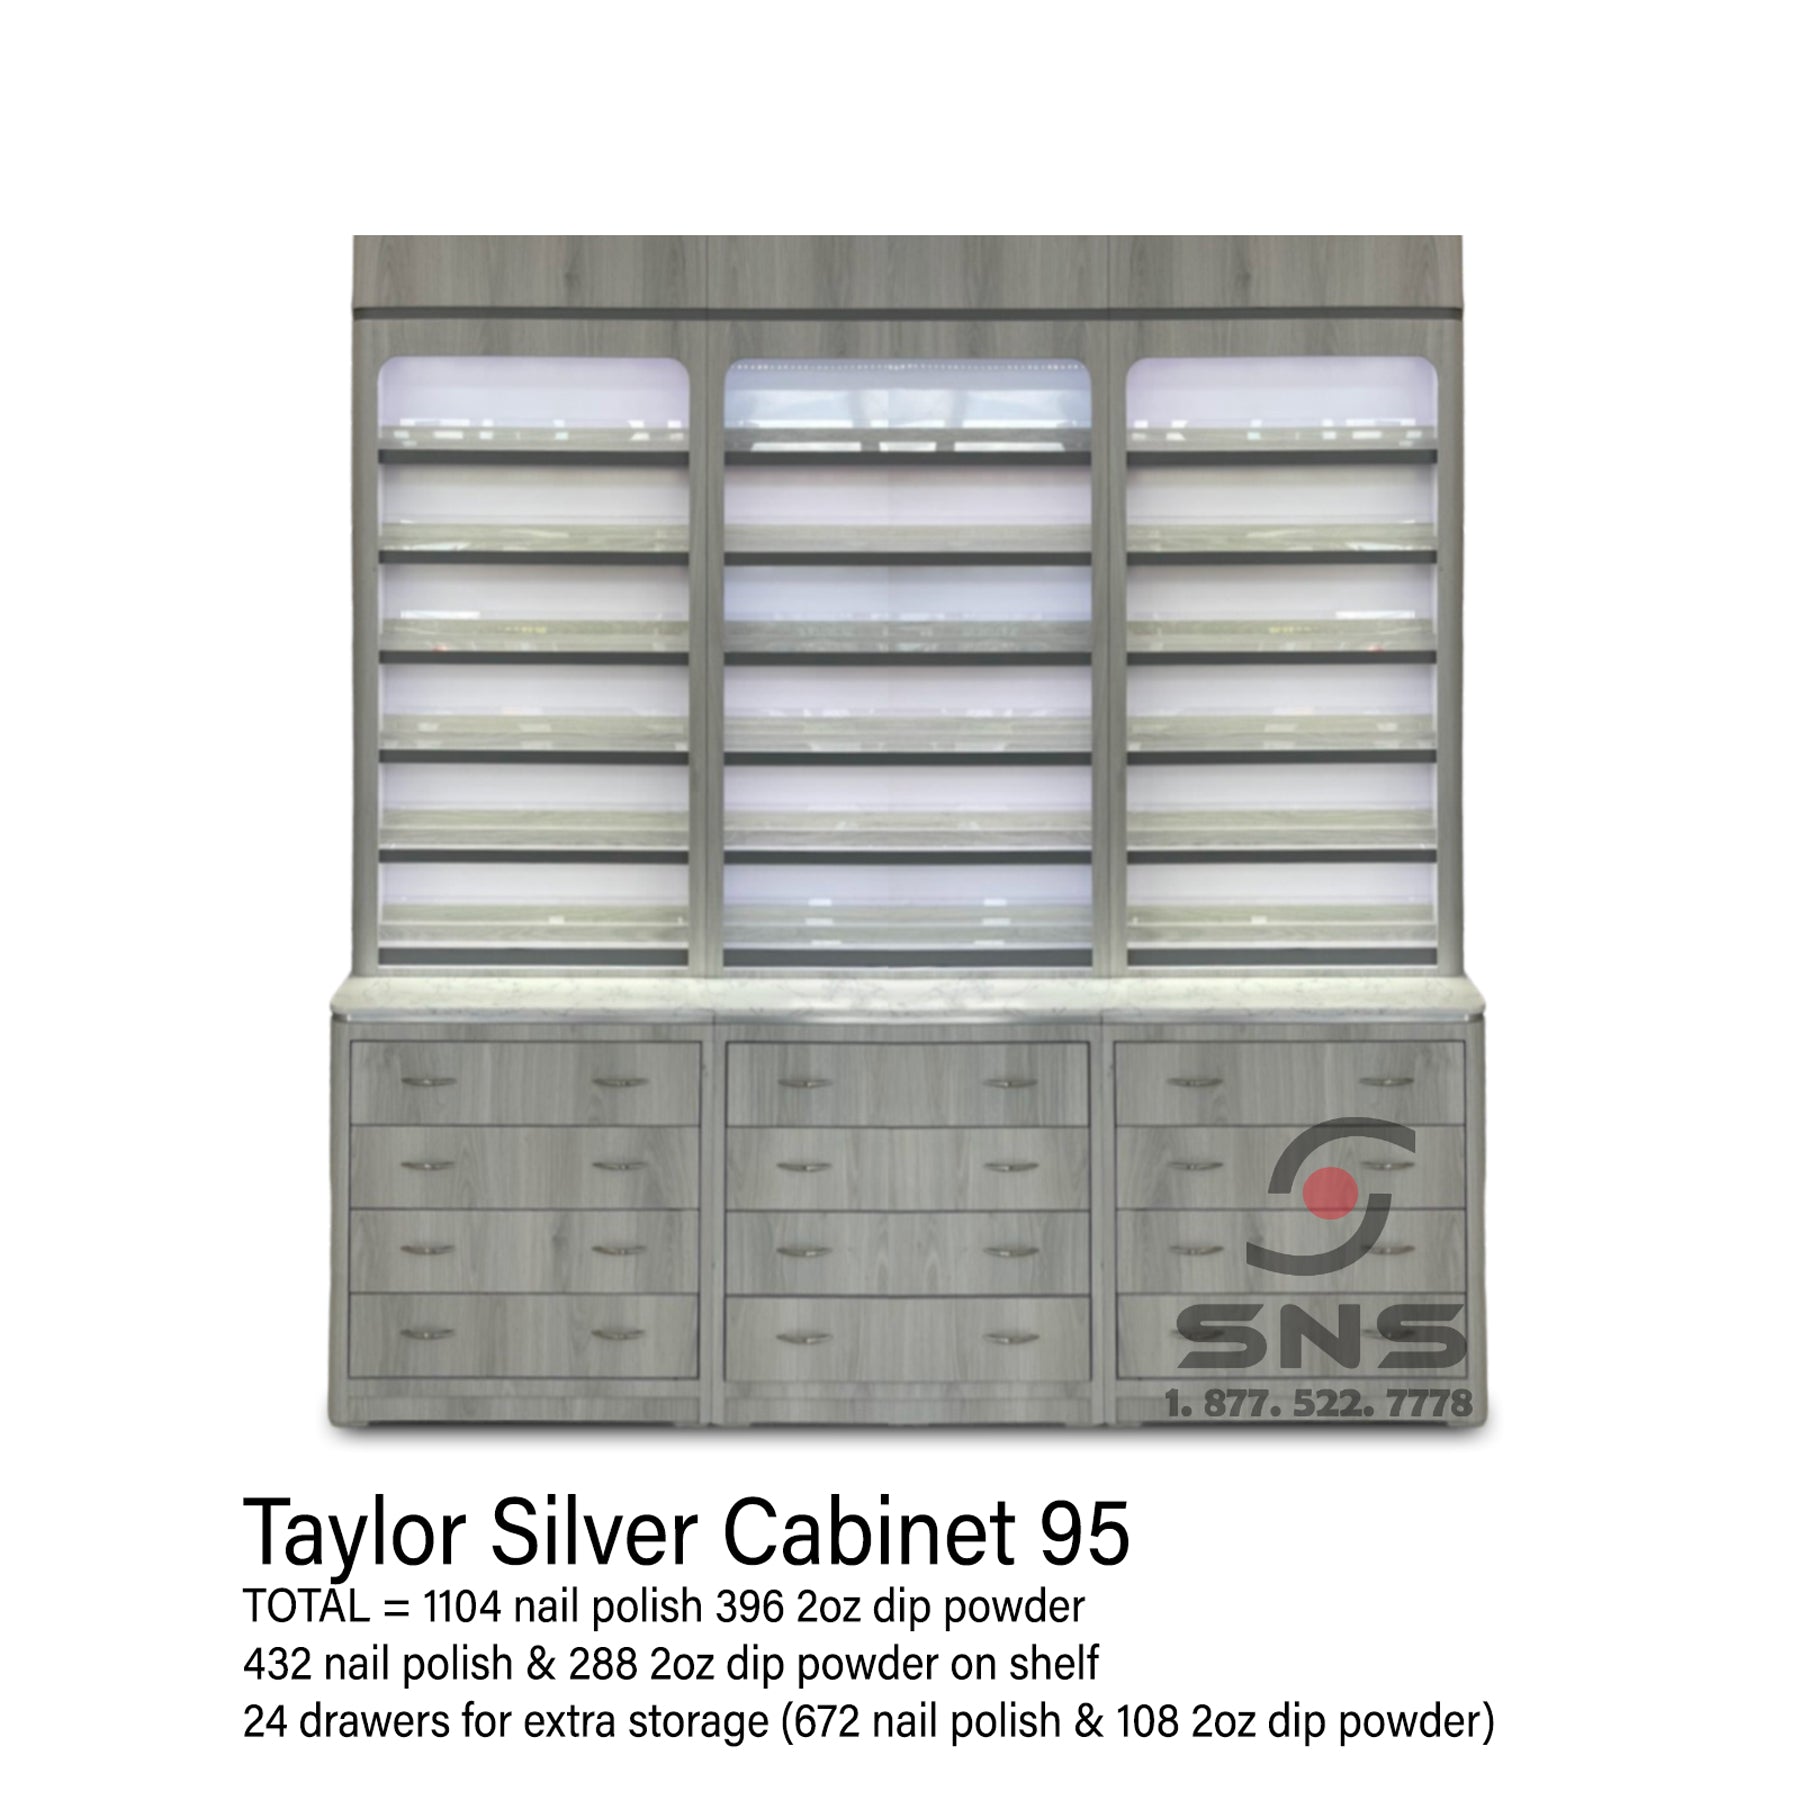 Taylor Silver Cabinet 95